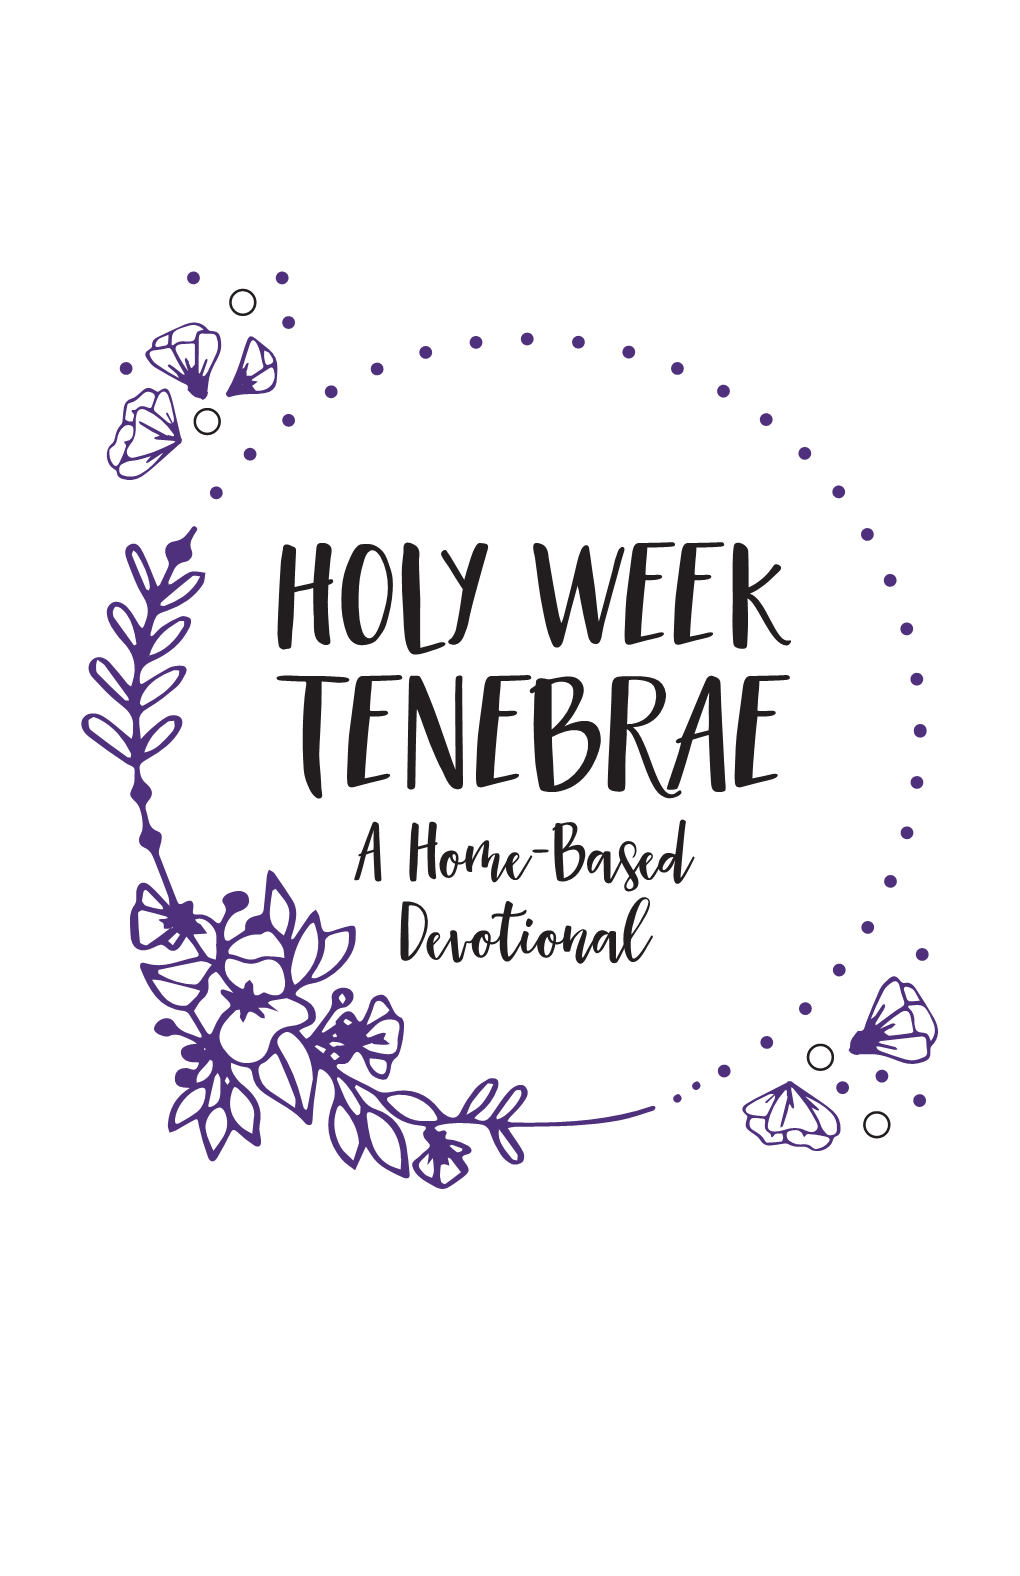 HOLY WEEK TENEBRAE a Home-Based Devotional INTRODUCTION